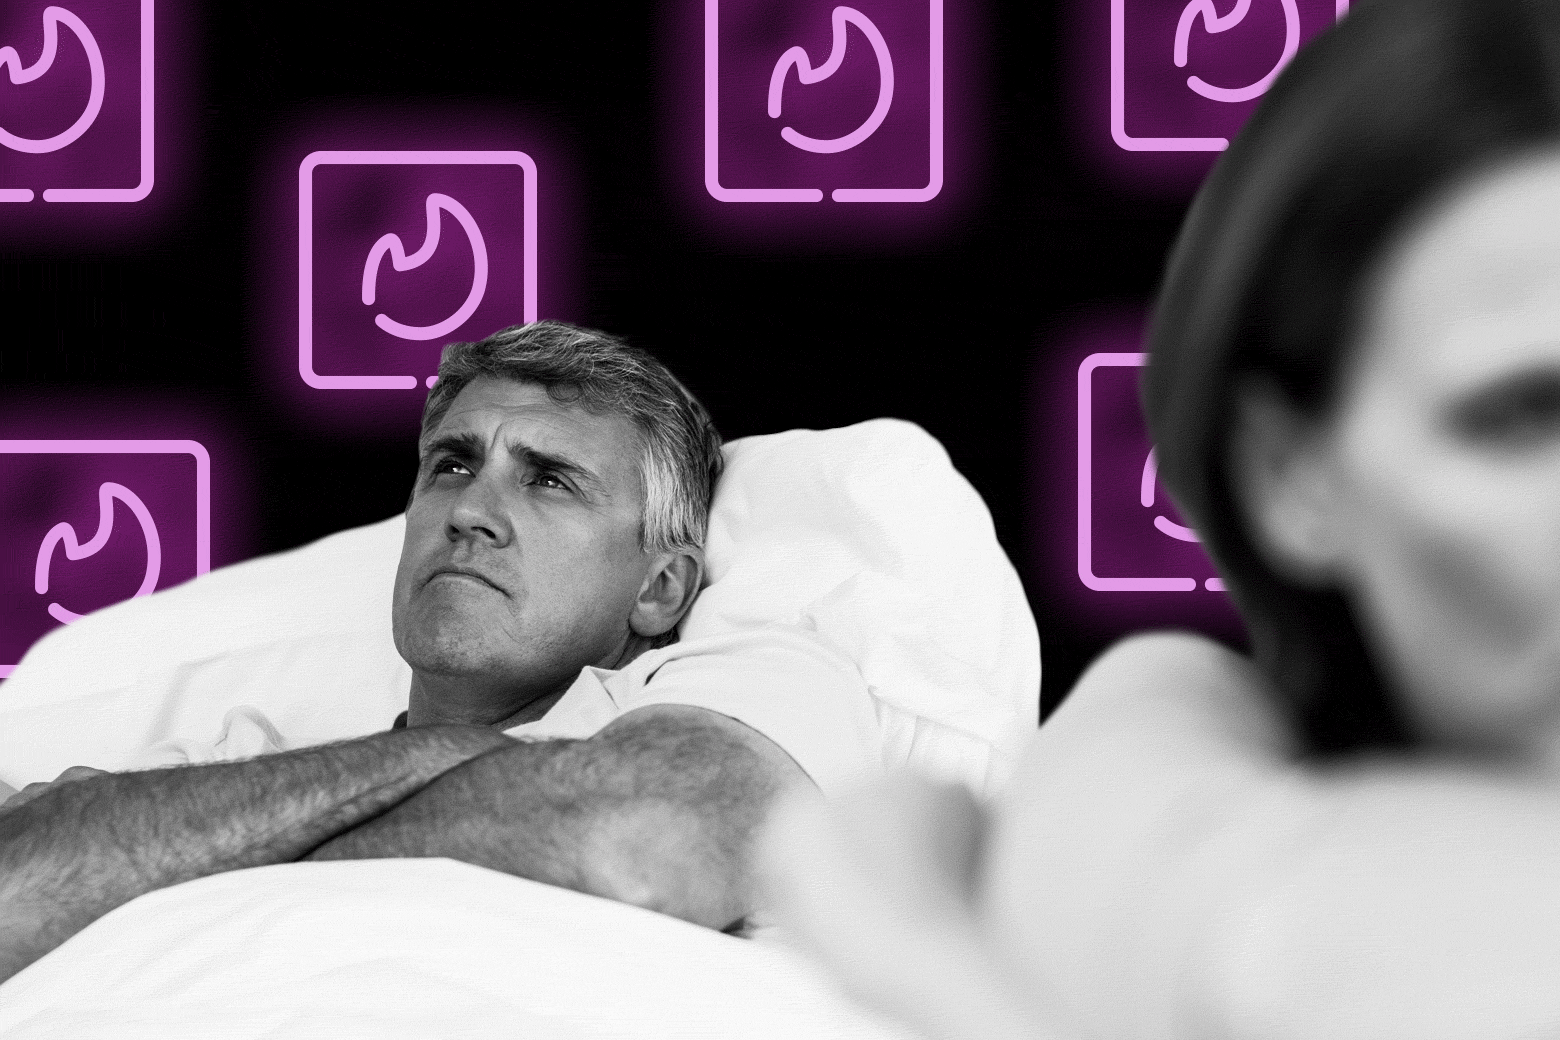 I discovered my girlfriend is a sex worker. What should I do?